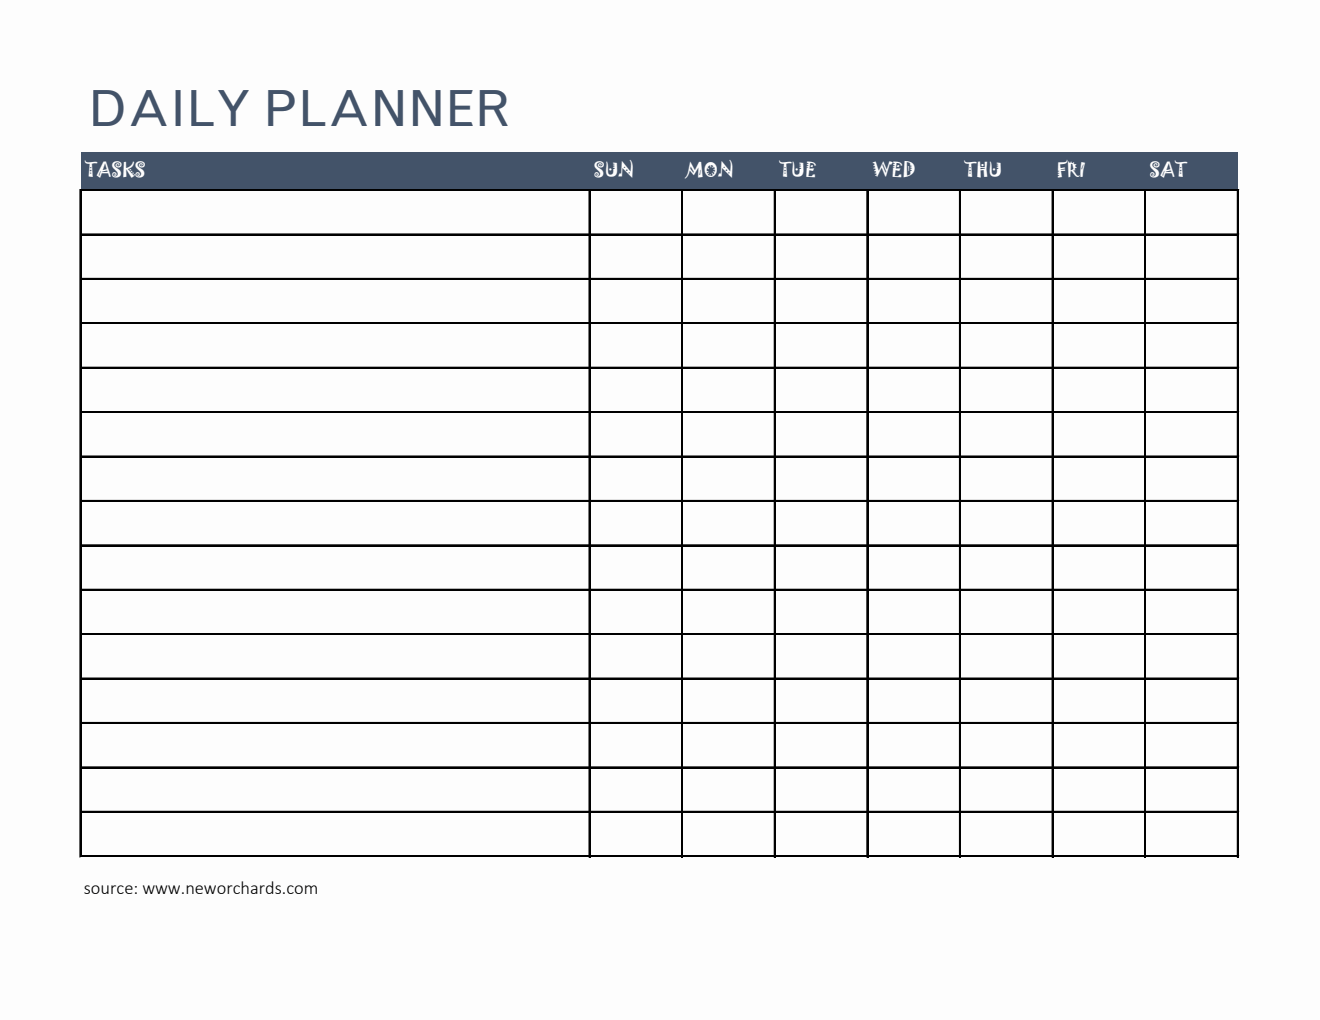 Daily Planner Template Printable in Excel